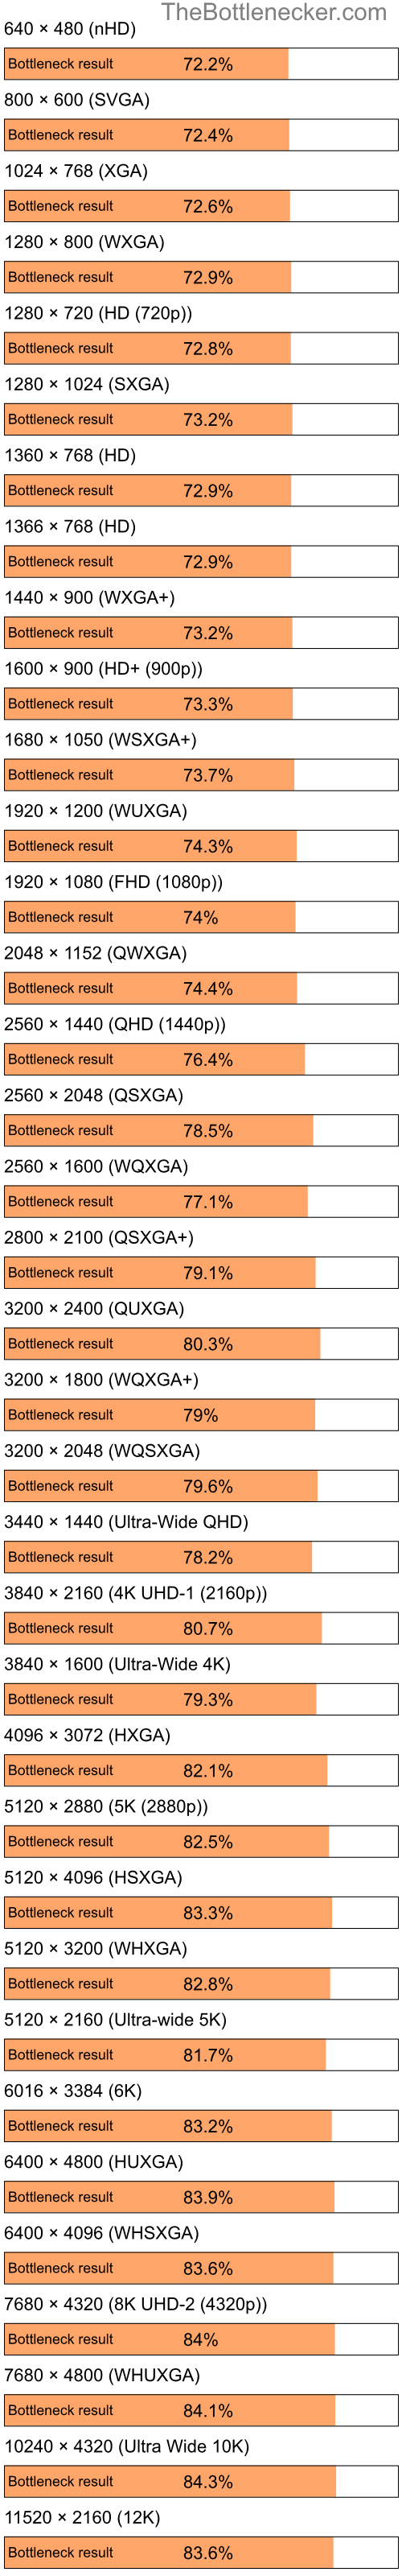 Bottleneck results by resolution for Intel Celeron M and NVIDIA GeForce 8400 in Graphic Card Intense Tasks